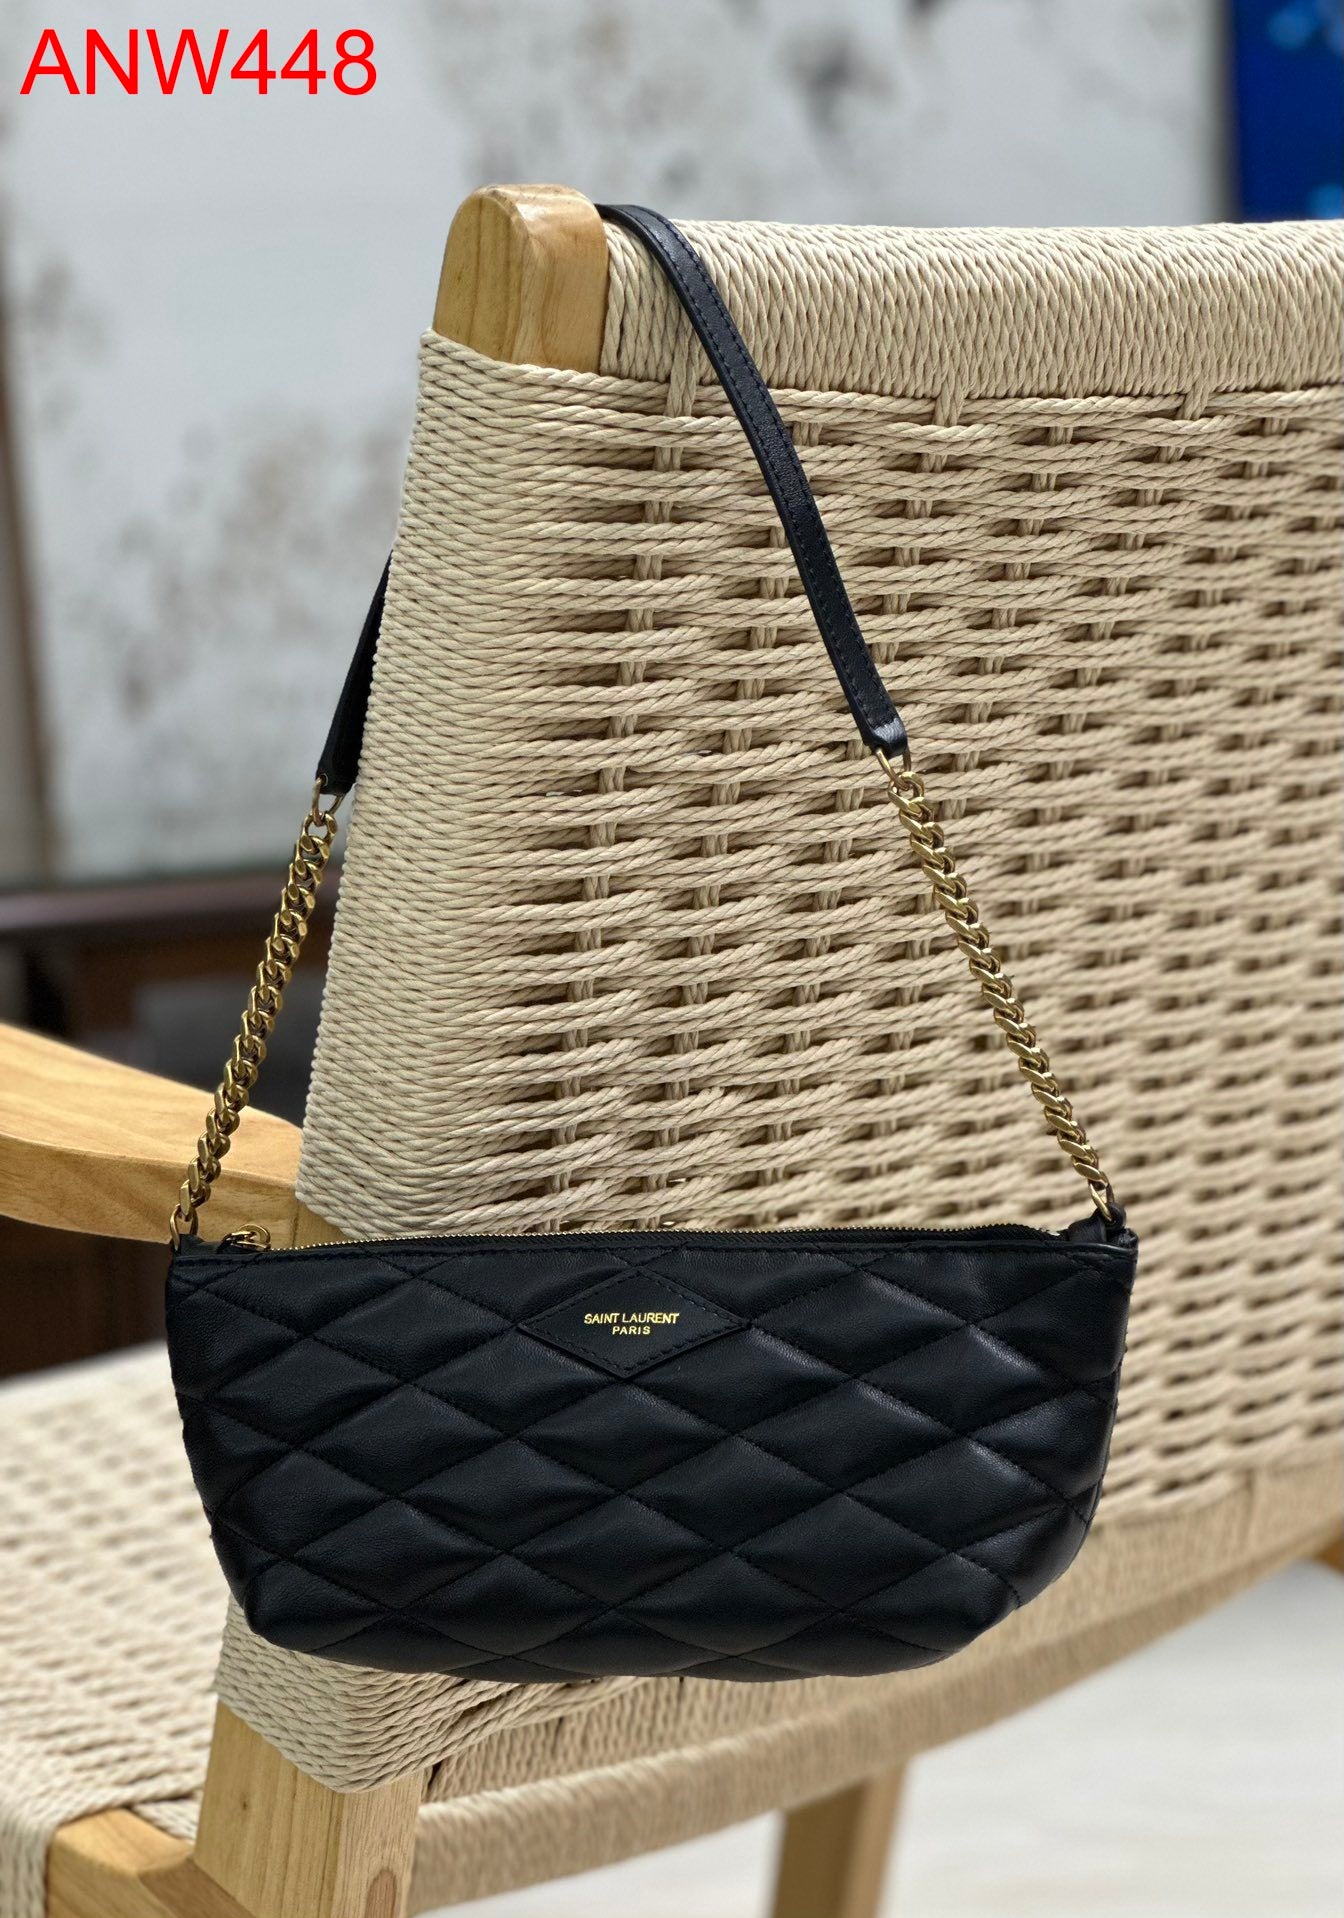 YSL MINI BAG IN QUILTED LAMBSKIN